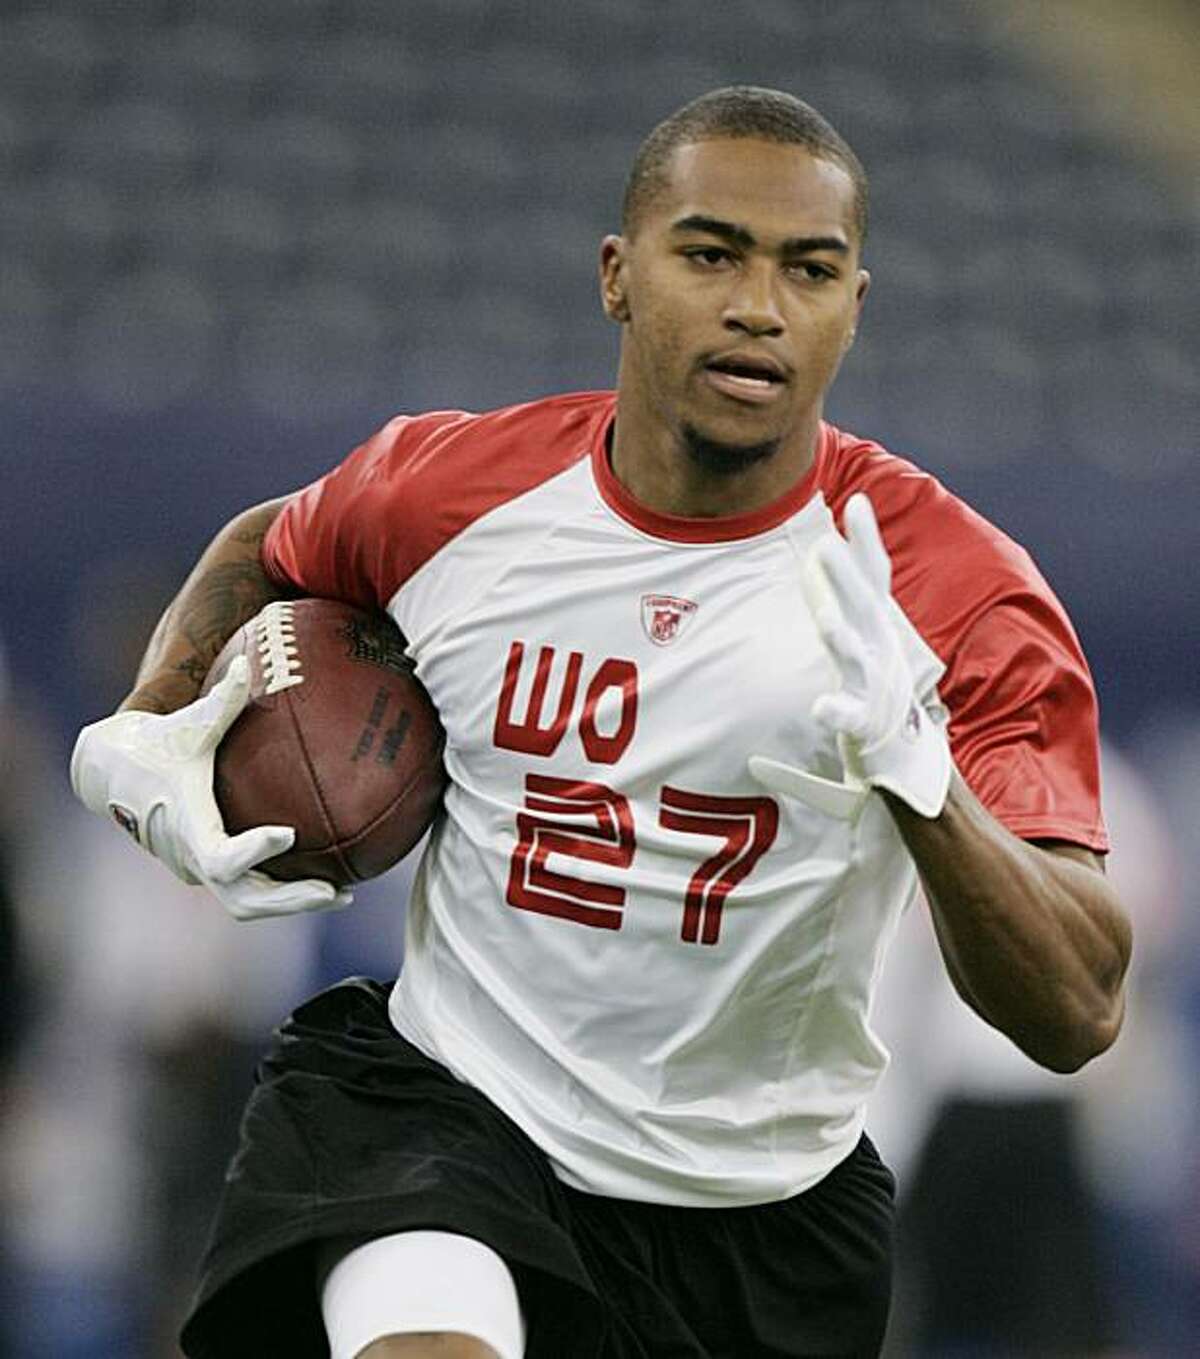 Receiver Desean Jackson, of California, runs a drill at the NFL Combine in Indianapolis, Sunday, Feb. 24, 2008. (AP Photo/Michael Conroy)